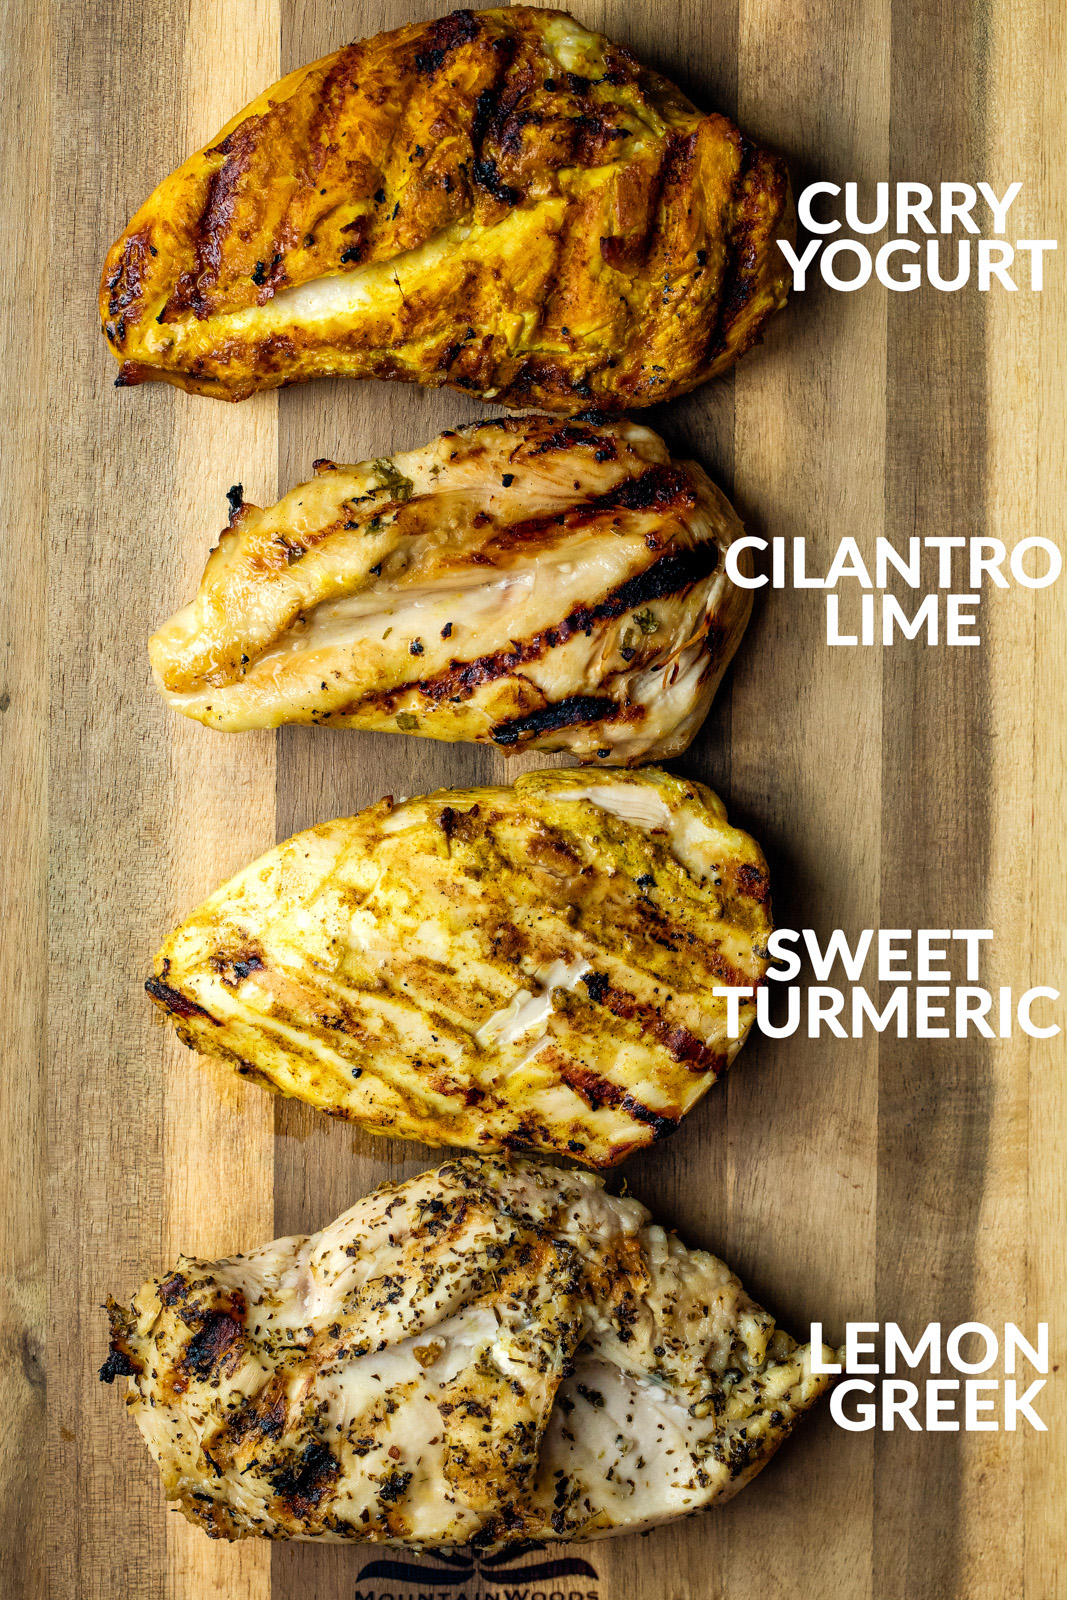 Clean eating is never boring when you have mouth-watering chicken marinades like Curry Yogurt and Sweet Turmeric.